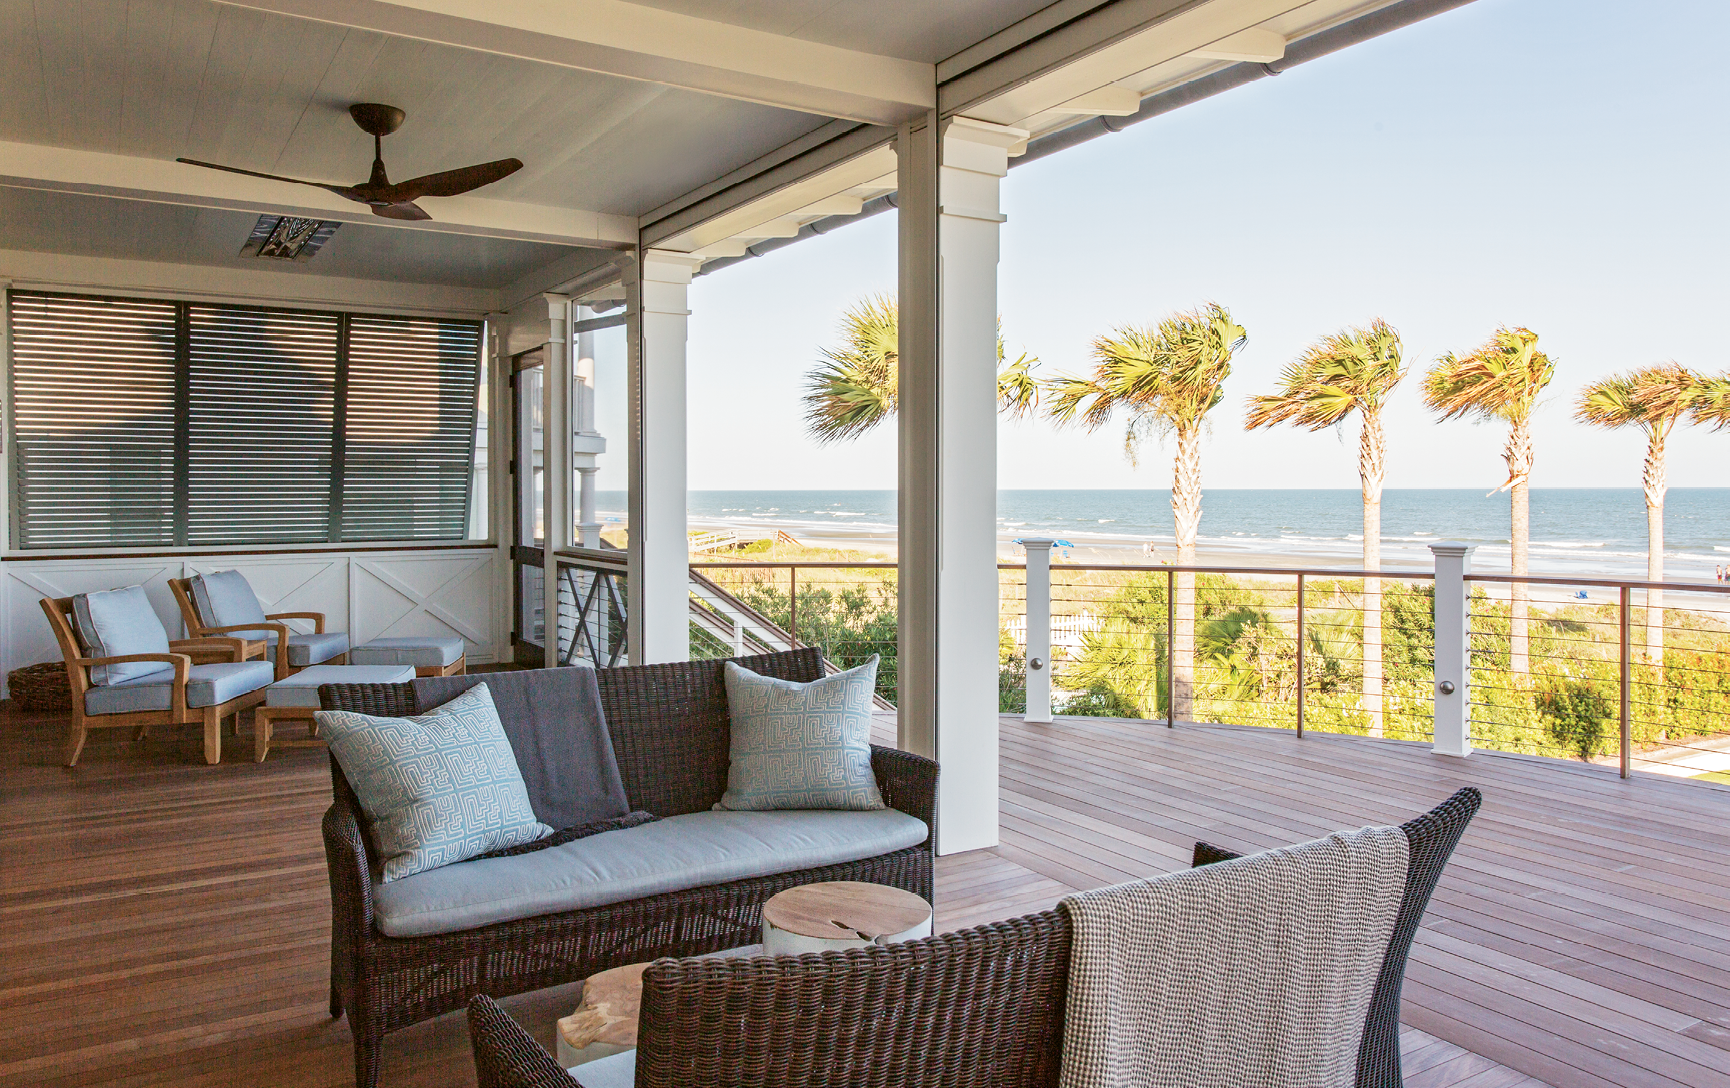 Kingsley Bate furnishings make this second-floor oceanfront patio feel like an extension of the family room.